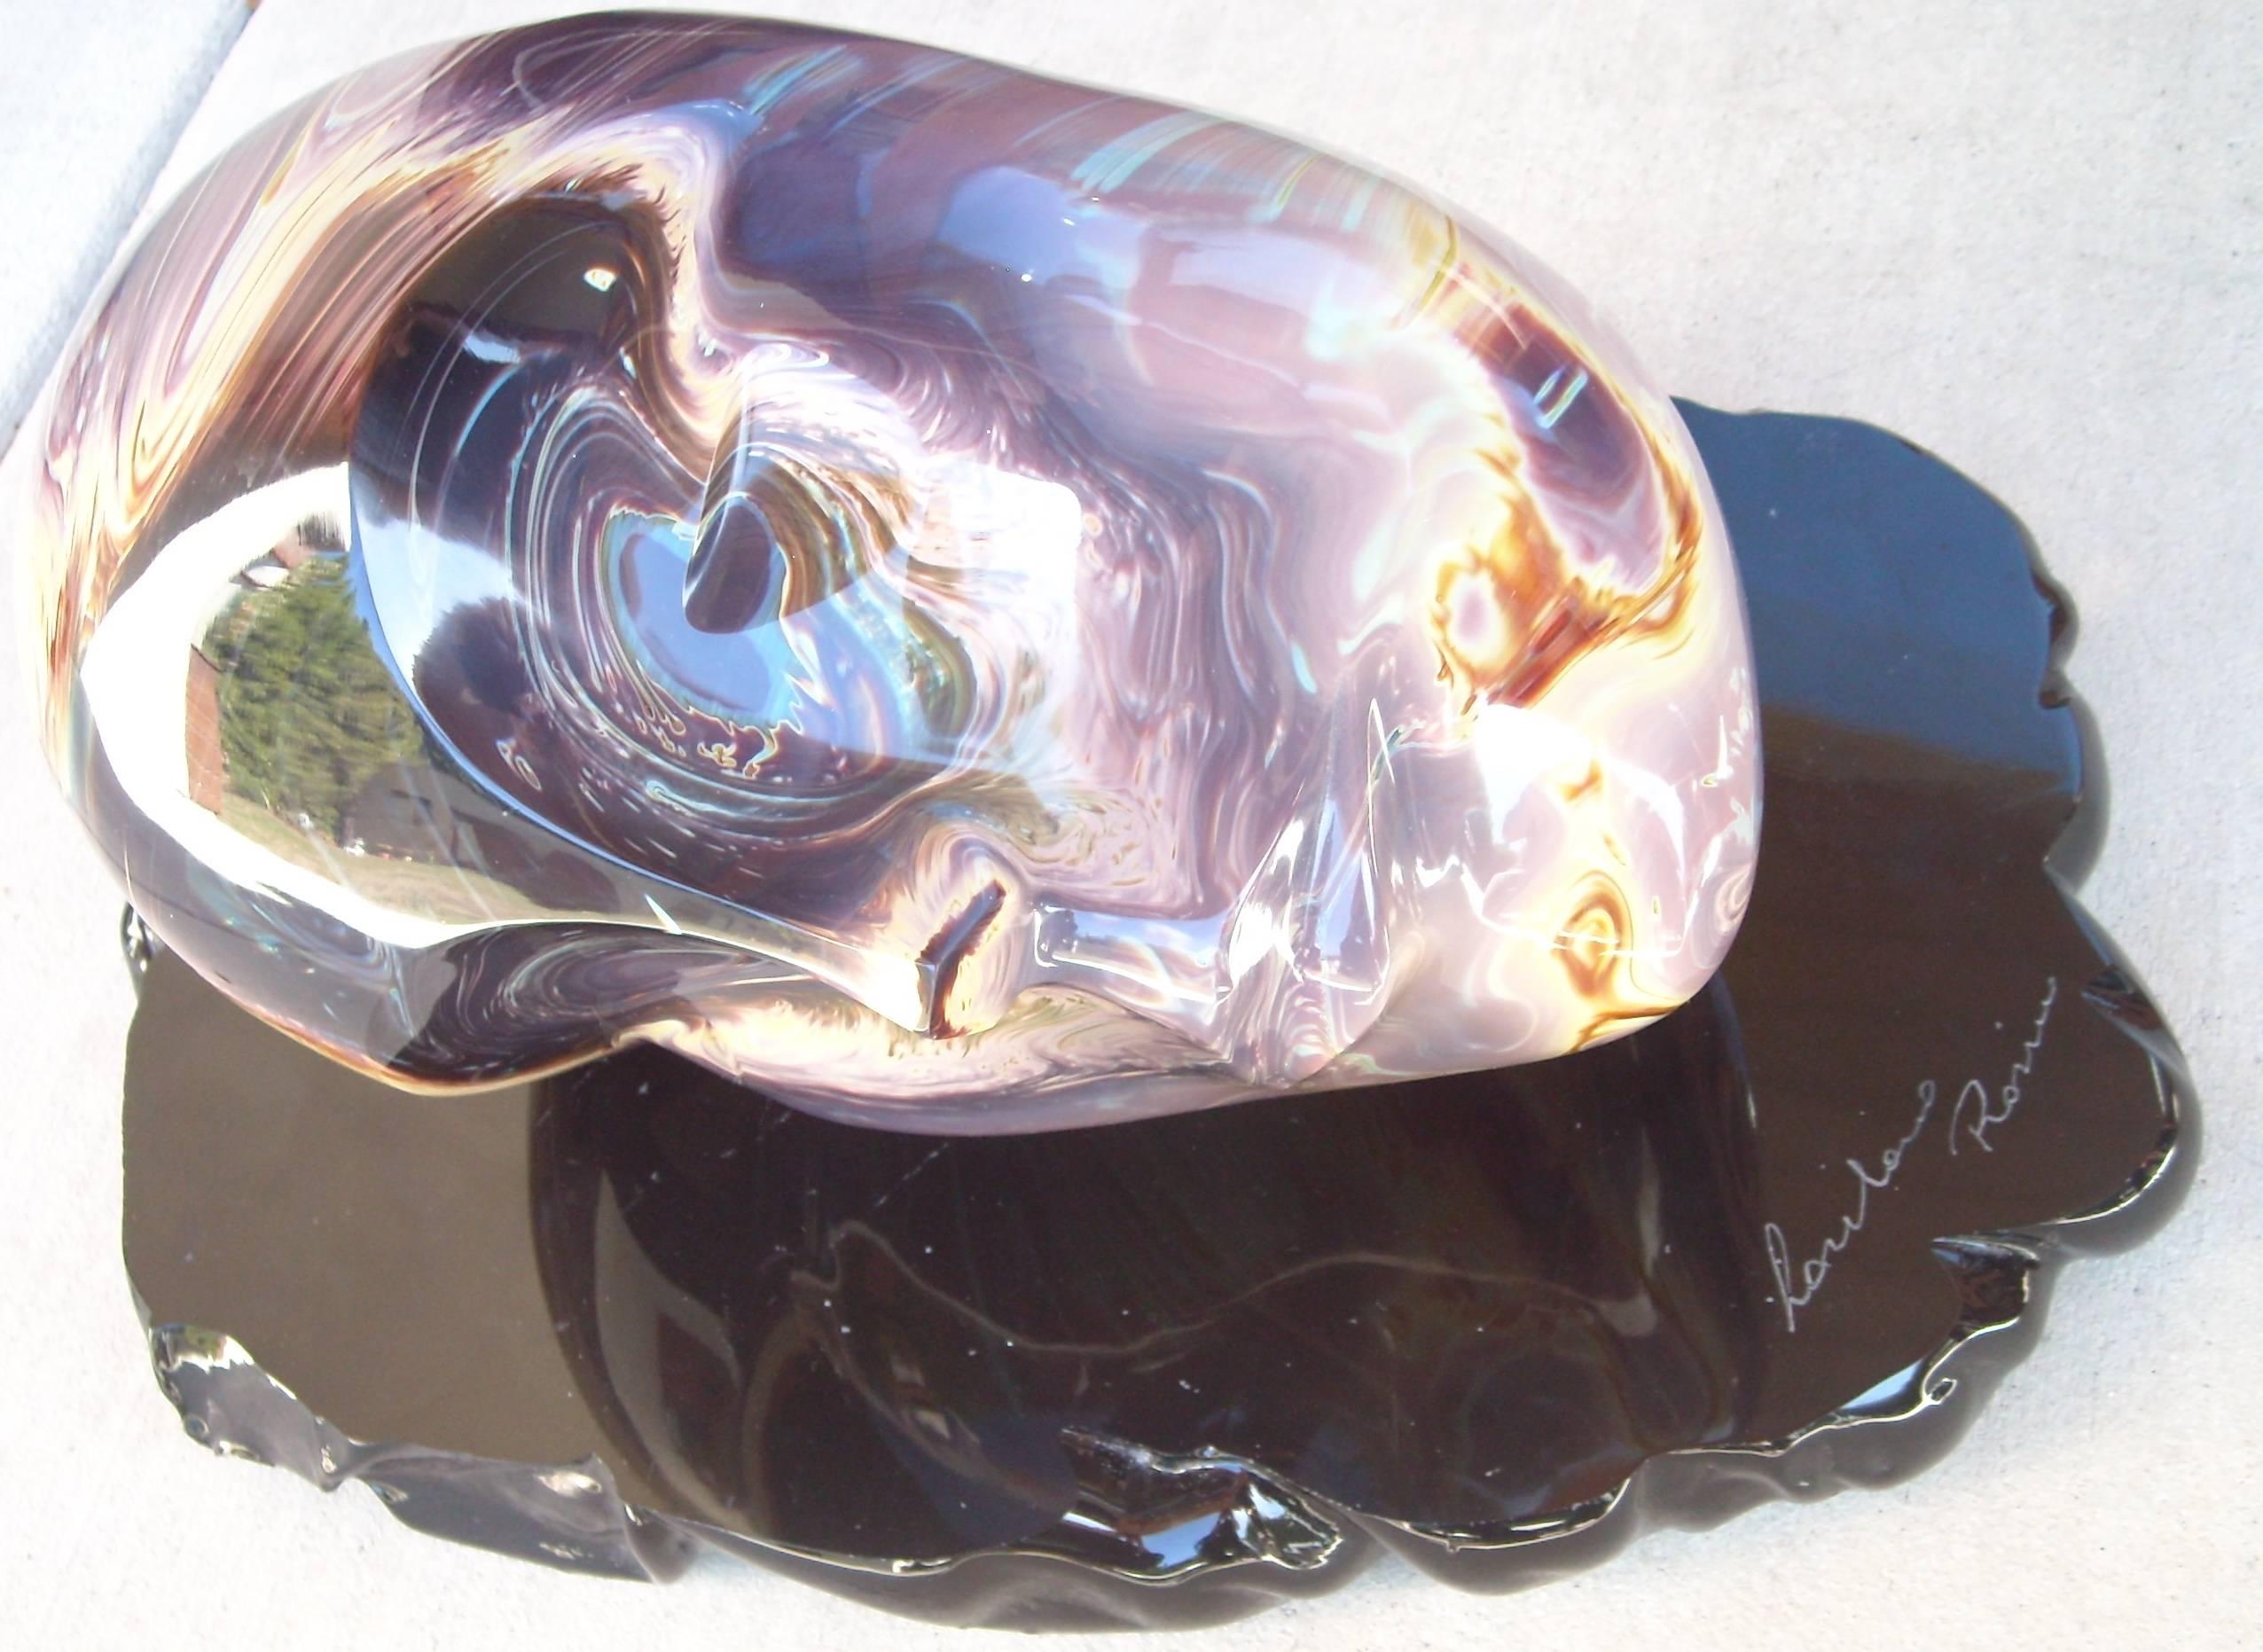 Nice Murano glass work in this master glass artist. Signed in the glass base.